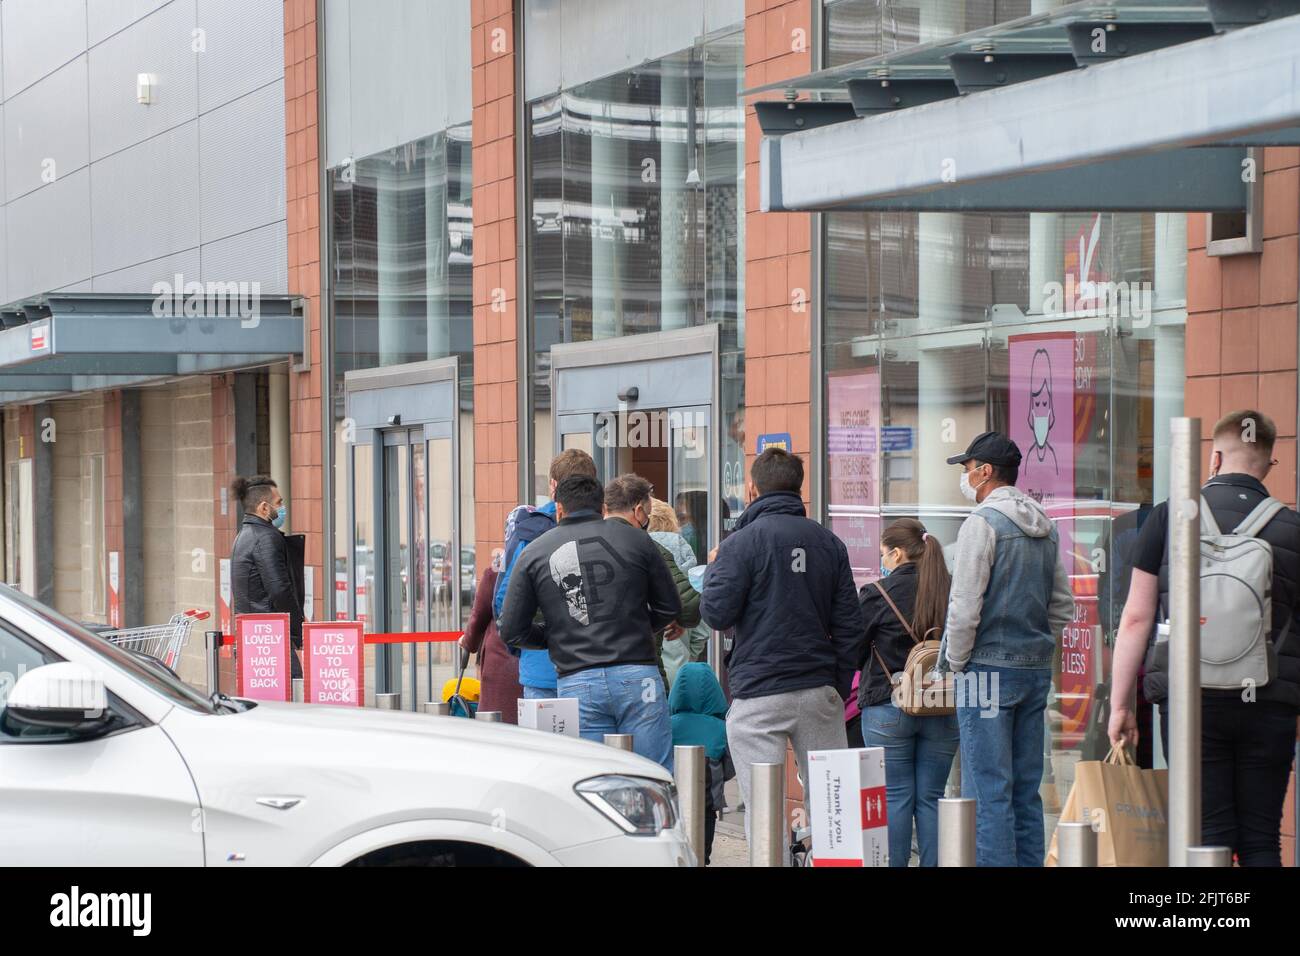 Dundee, Tayside, Scotland, 26.04.21: Large queues wait to enter TK Maxx at the Gallagher Retail Park in Dundee, as Scotland leaves its second lockdown and restrictions are relaxed, and the shops open up again. Credit: Barry Nixon Stable Air Media/Alamy Live News Stock Photo